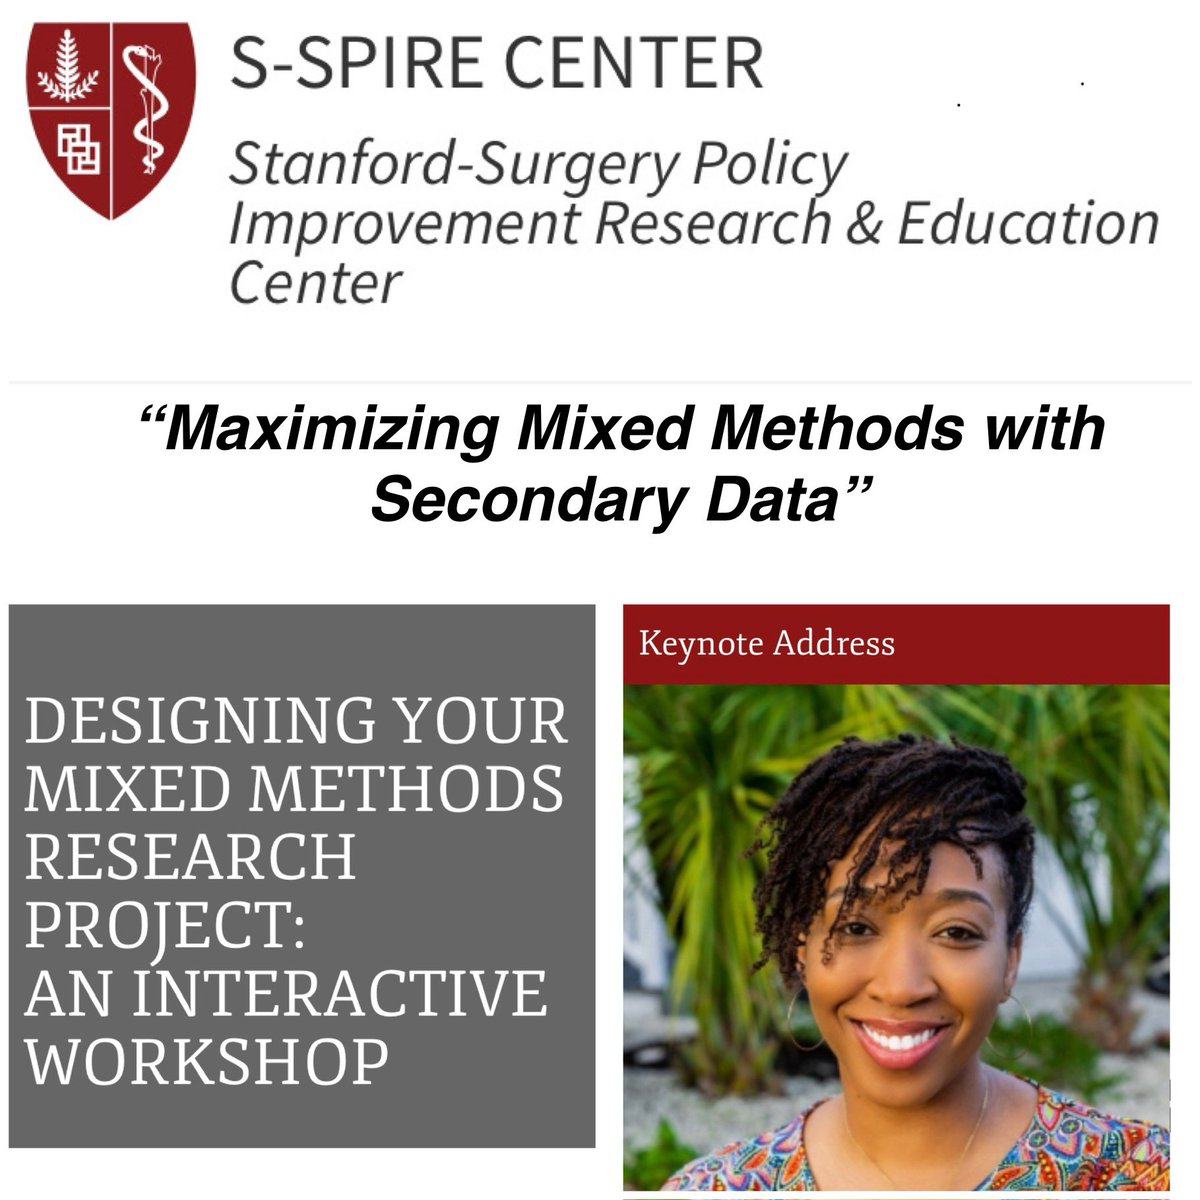 I am honored and humbled to deliver the keynote for the @Stanford @StanfordSPIRE #MixedMethods workshop this week. Looking forward to sharing tips for doing culturally-sensitive mixed methods and maximizing #SecondaryData in the process.